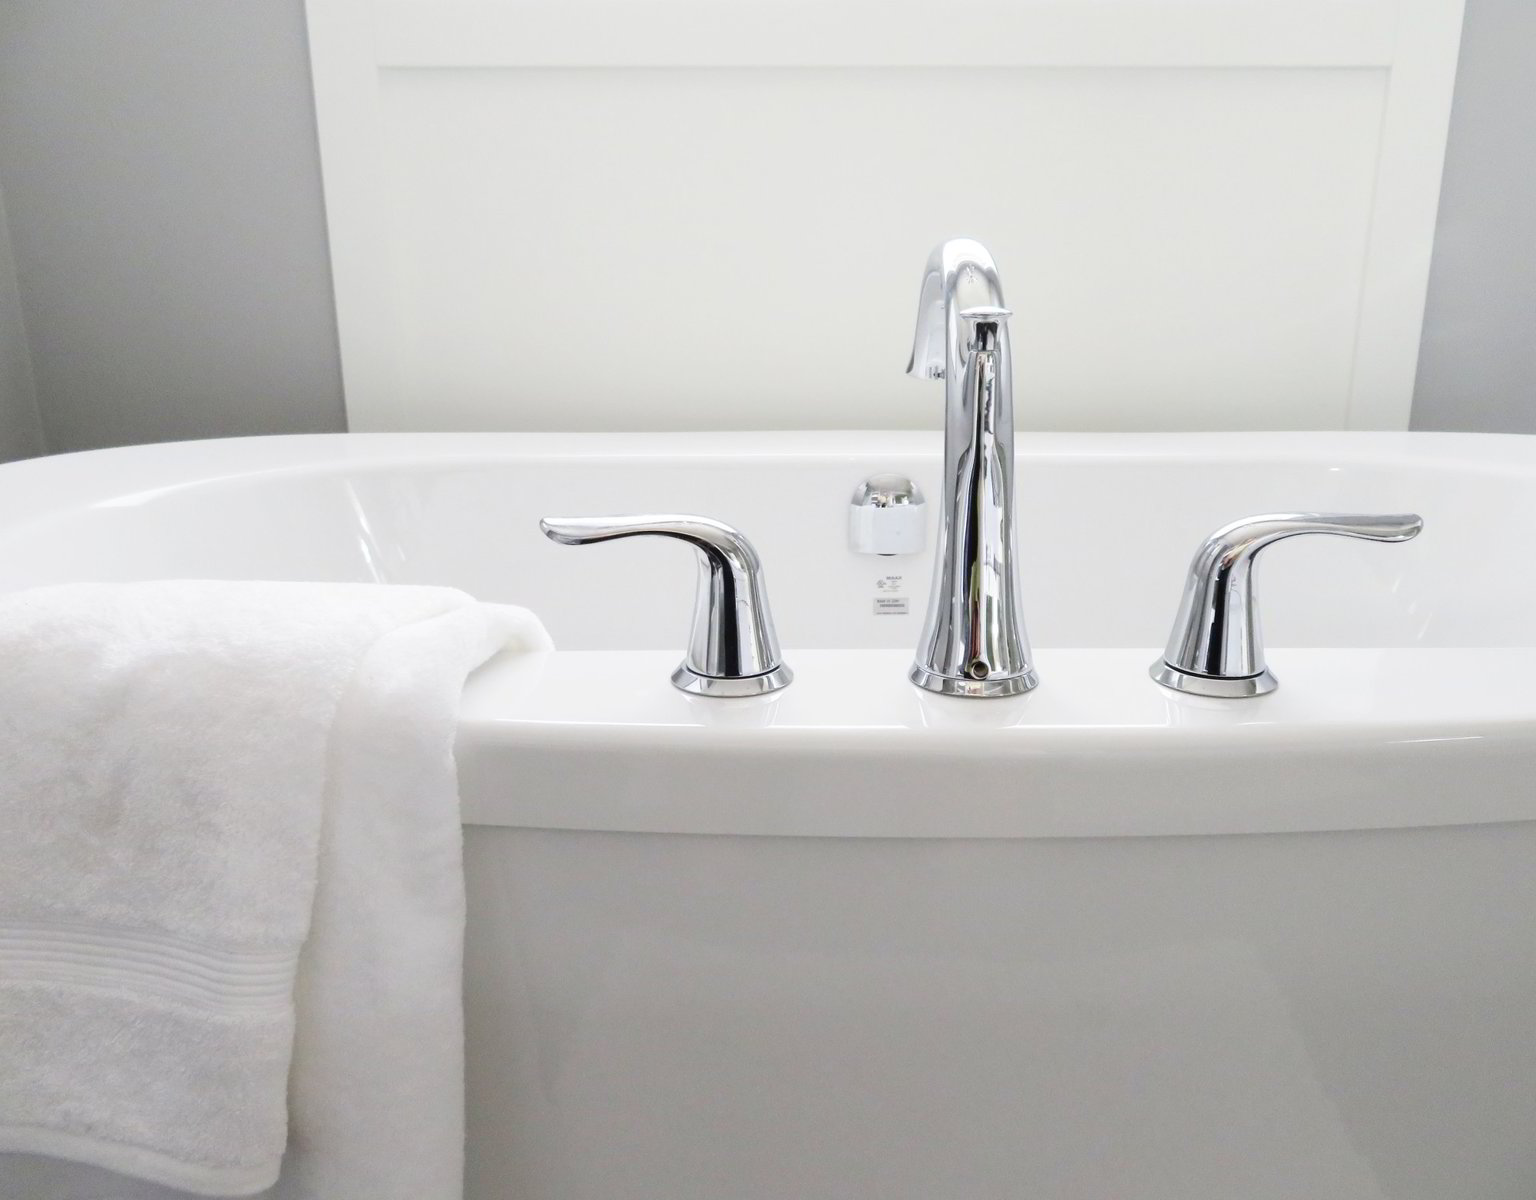 How To Fix A Leaky Bathtub Faucet, Bathtub Faucet Dripping